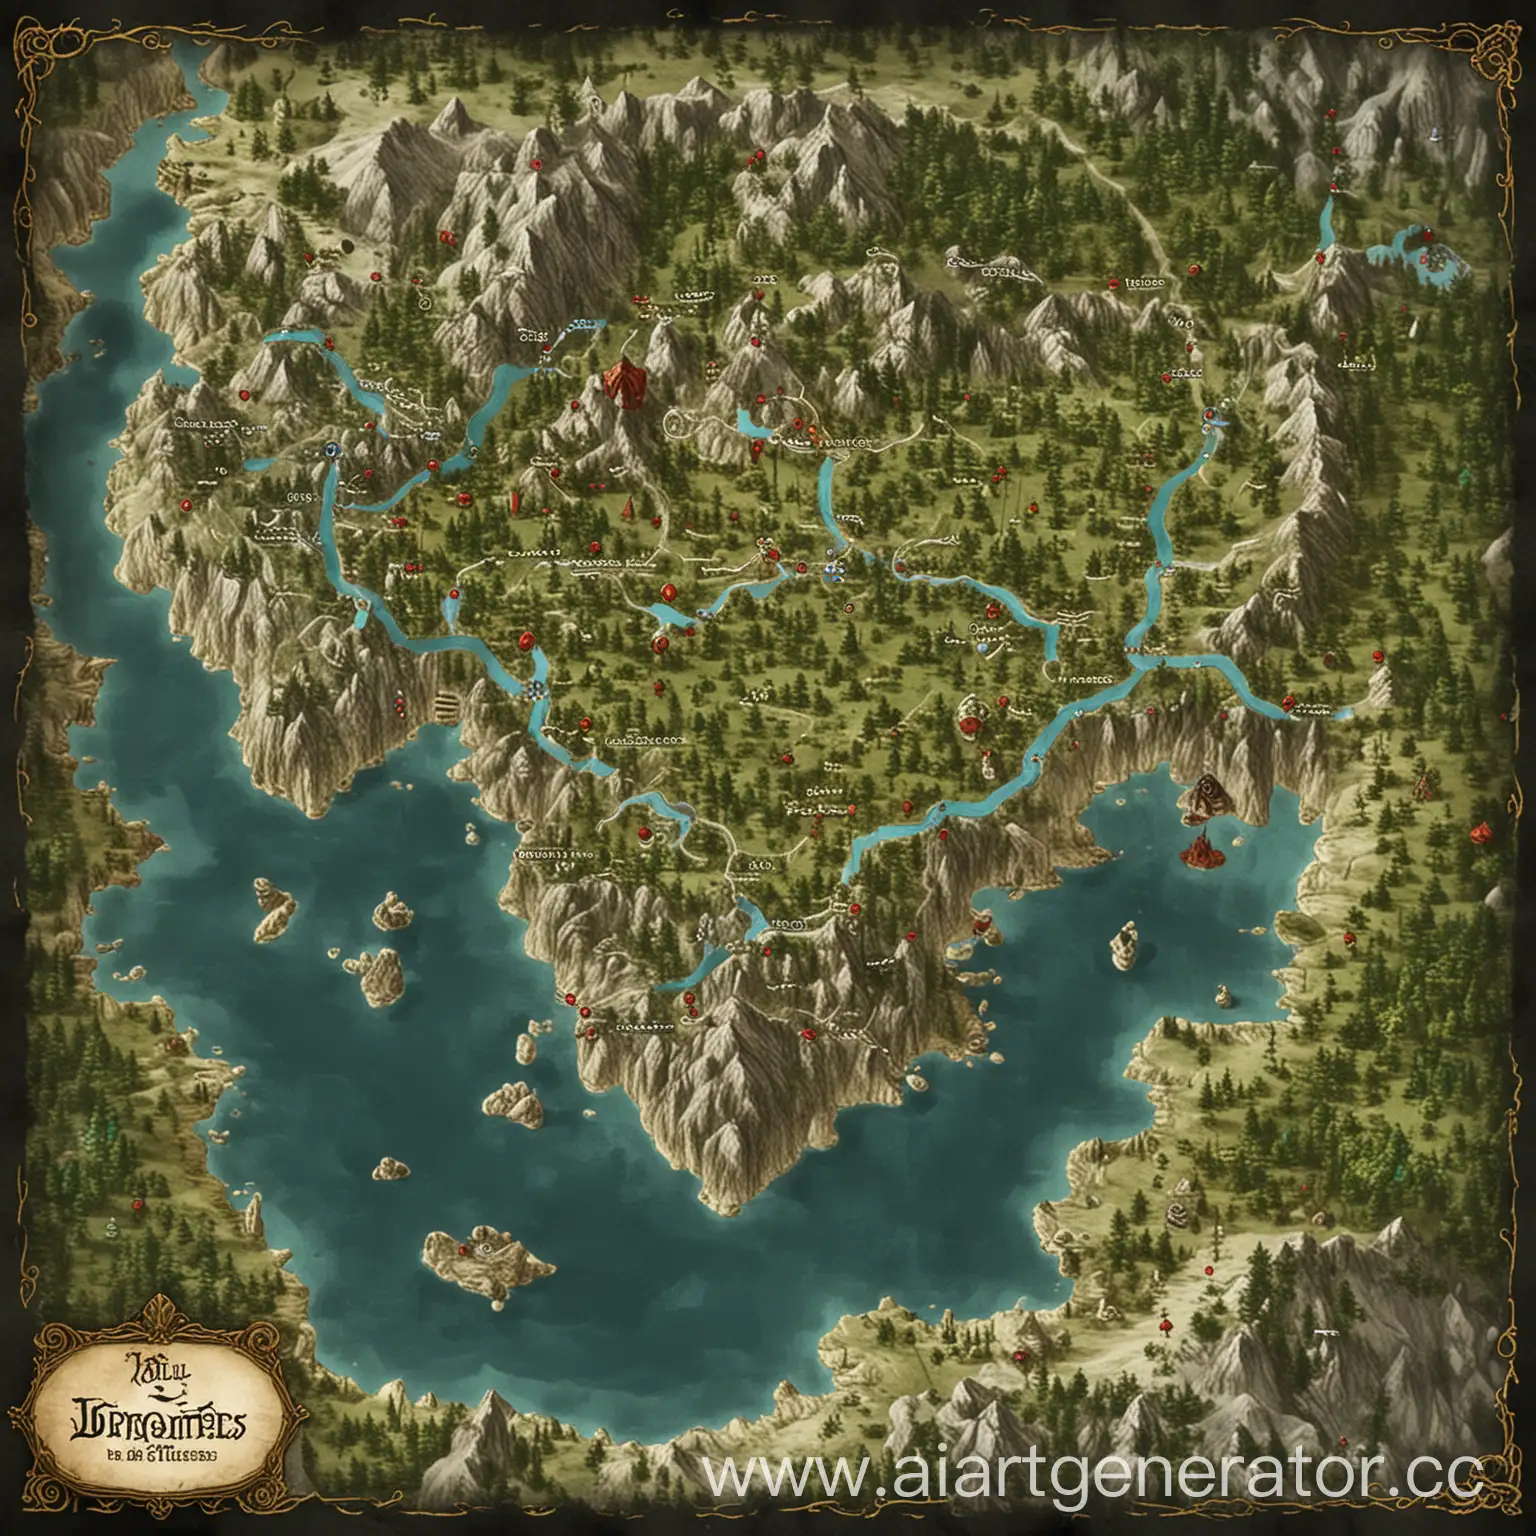 Fantasy-World-Map-with-Kingdoms-and-Adventurous-Locations